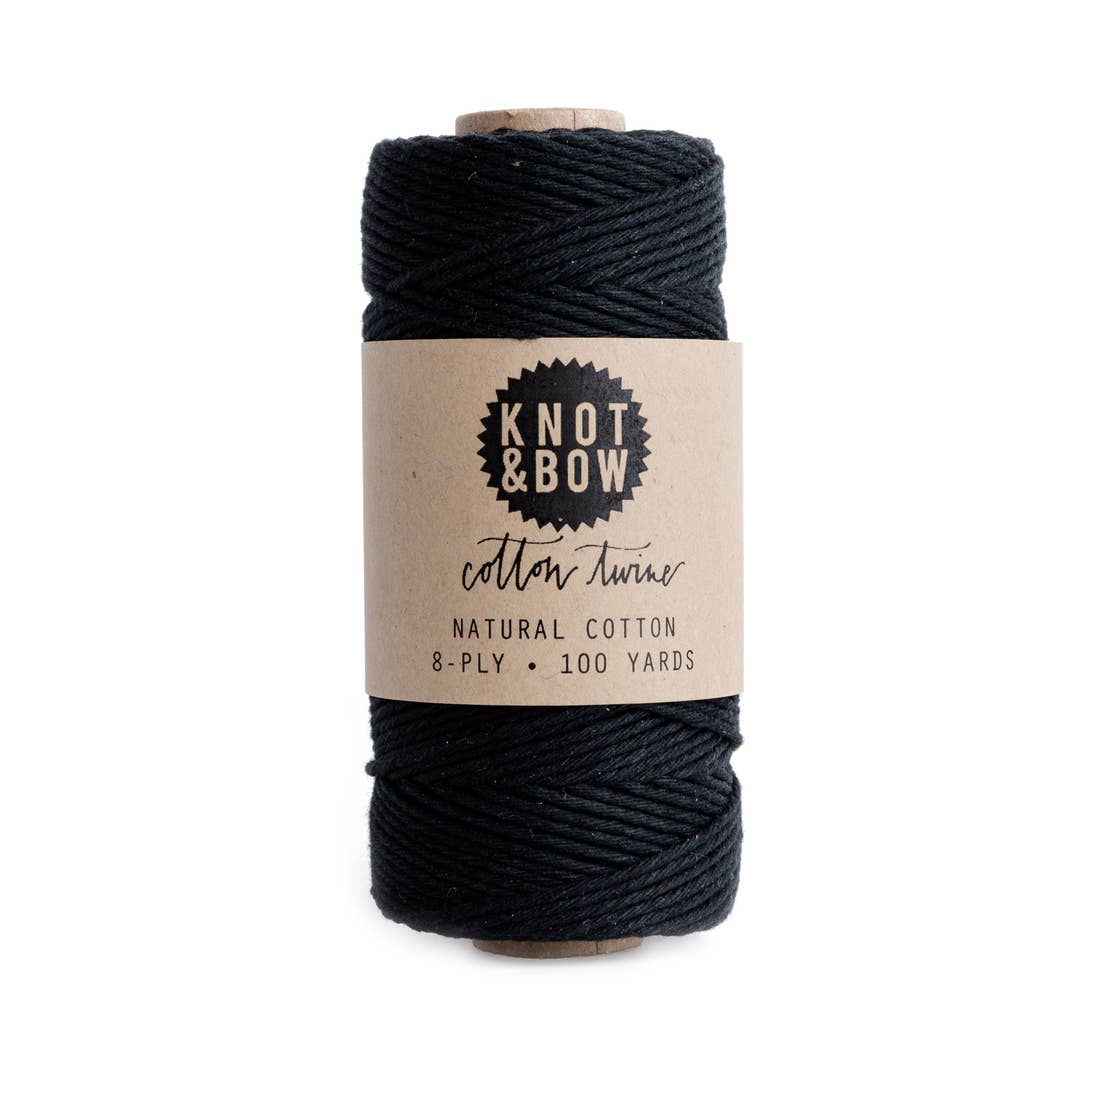 Cotton Twine by Knot & Bow - Black Cotton by Knot & Bow - K. A. Artist Shop